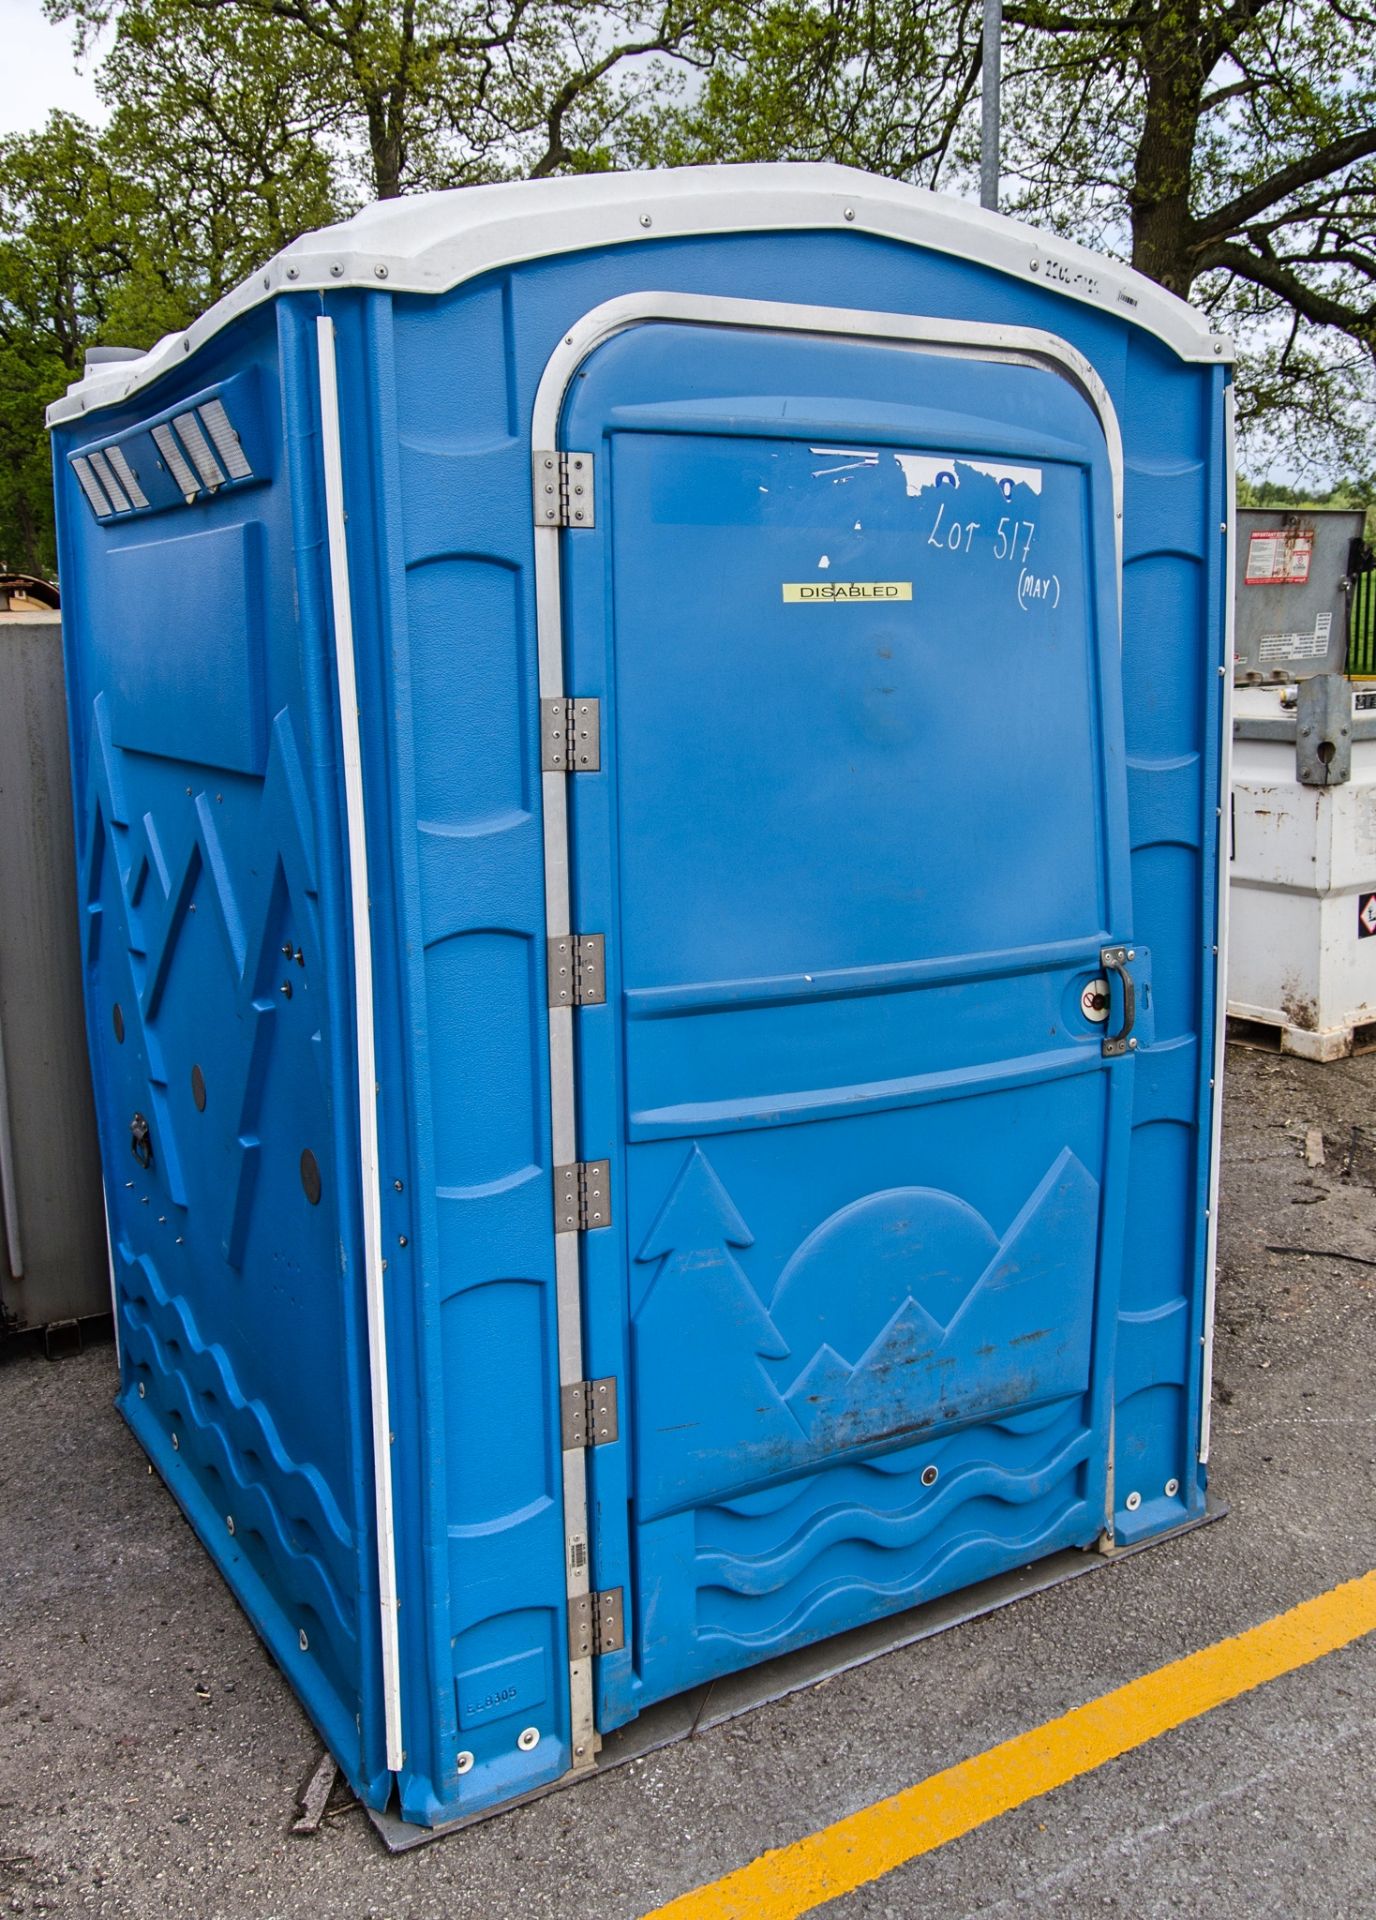 Disabled portable toilet 22087022